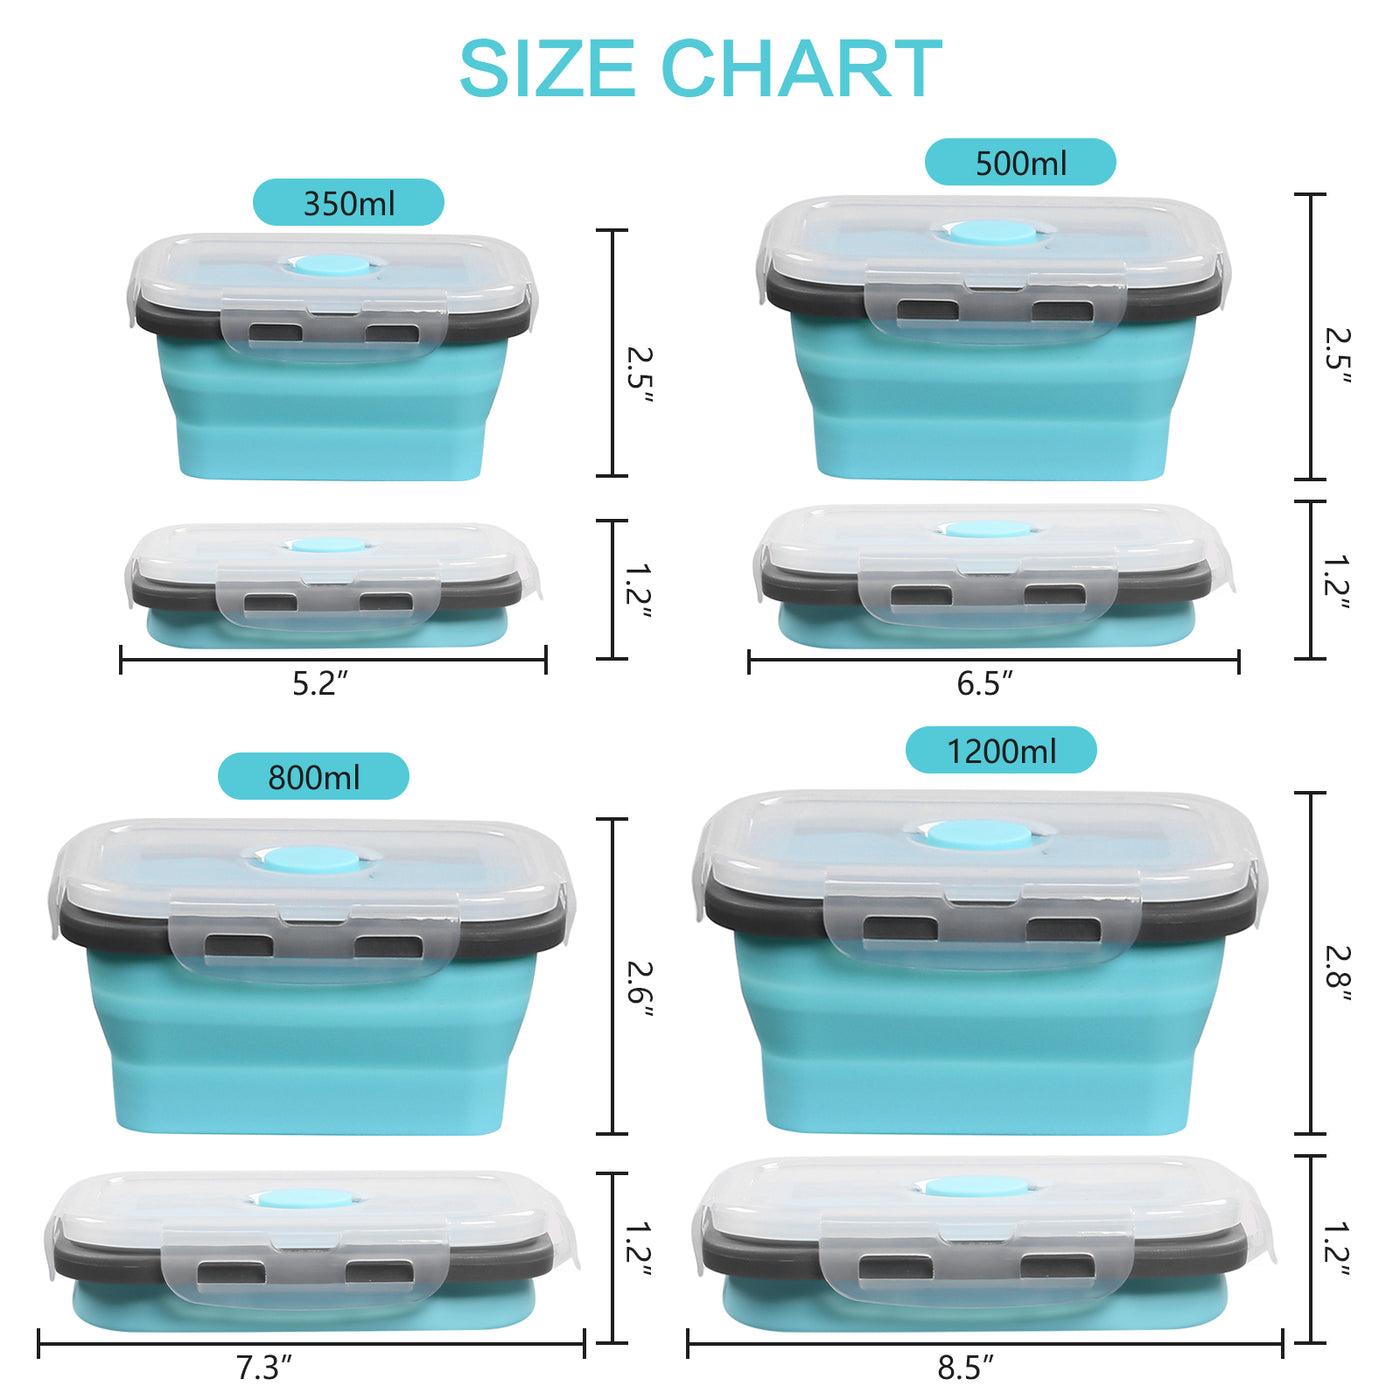 8 PCS Food Storage Containers with Lids, Portable Collapsible Expandable Bowls-Travel-Friendly Foldable Folding Silicone Lunch Box Set, 4PCS Round Shape & 4PCS Square, Food Storage Box